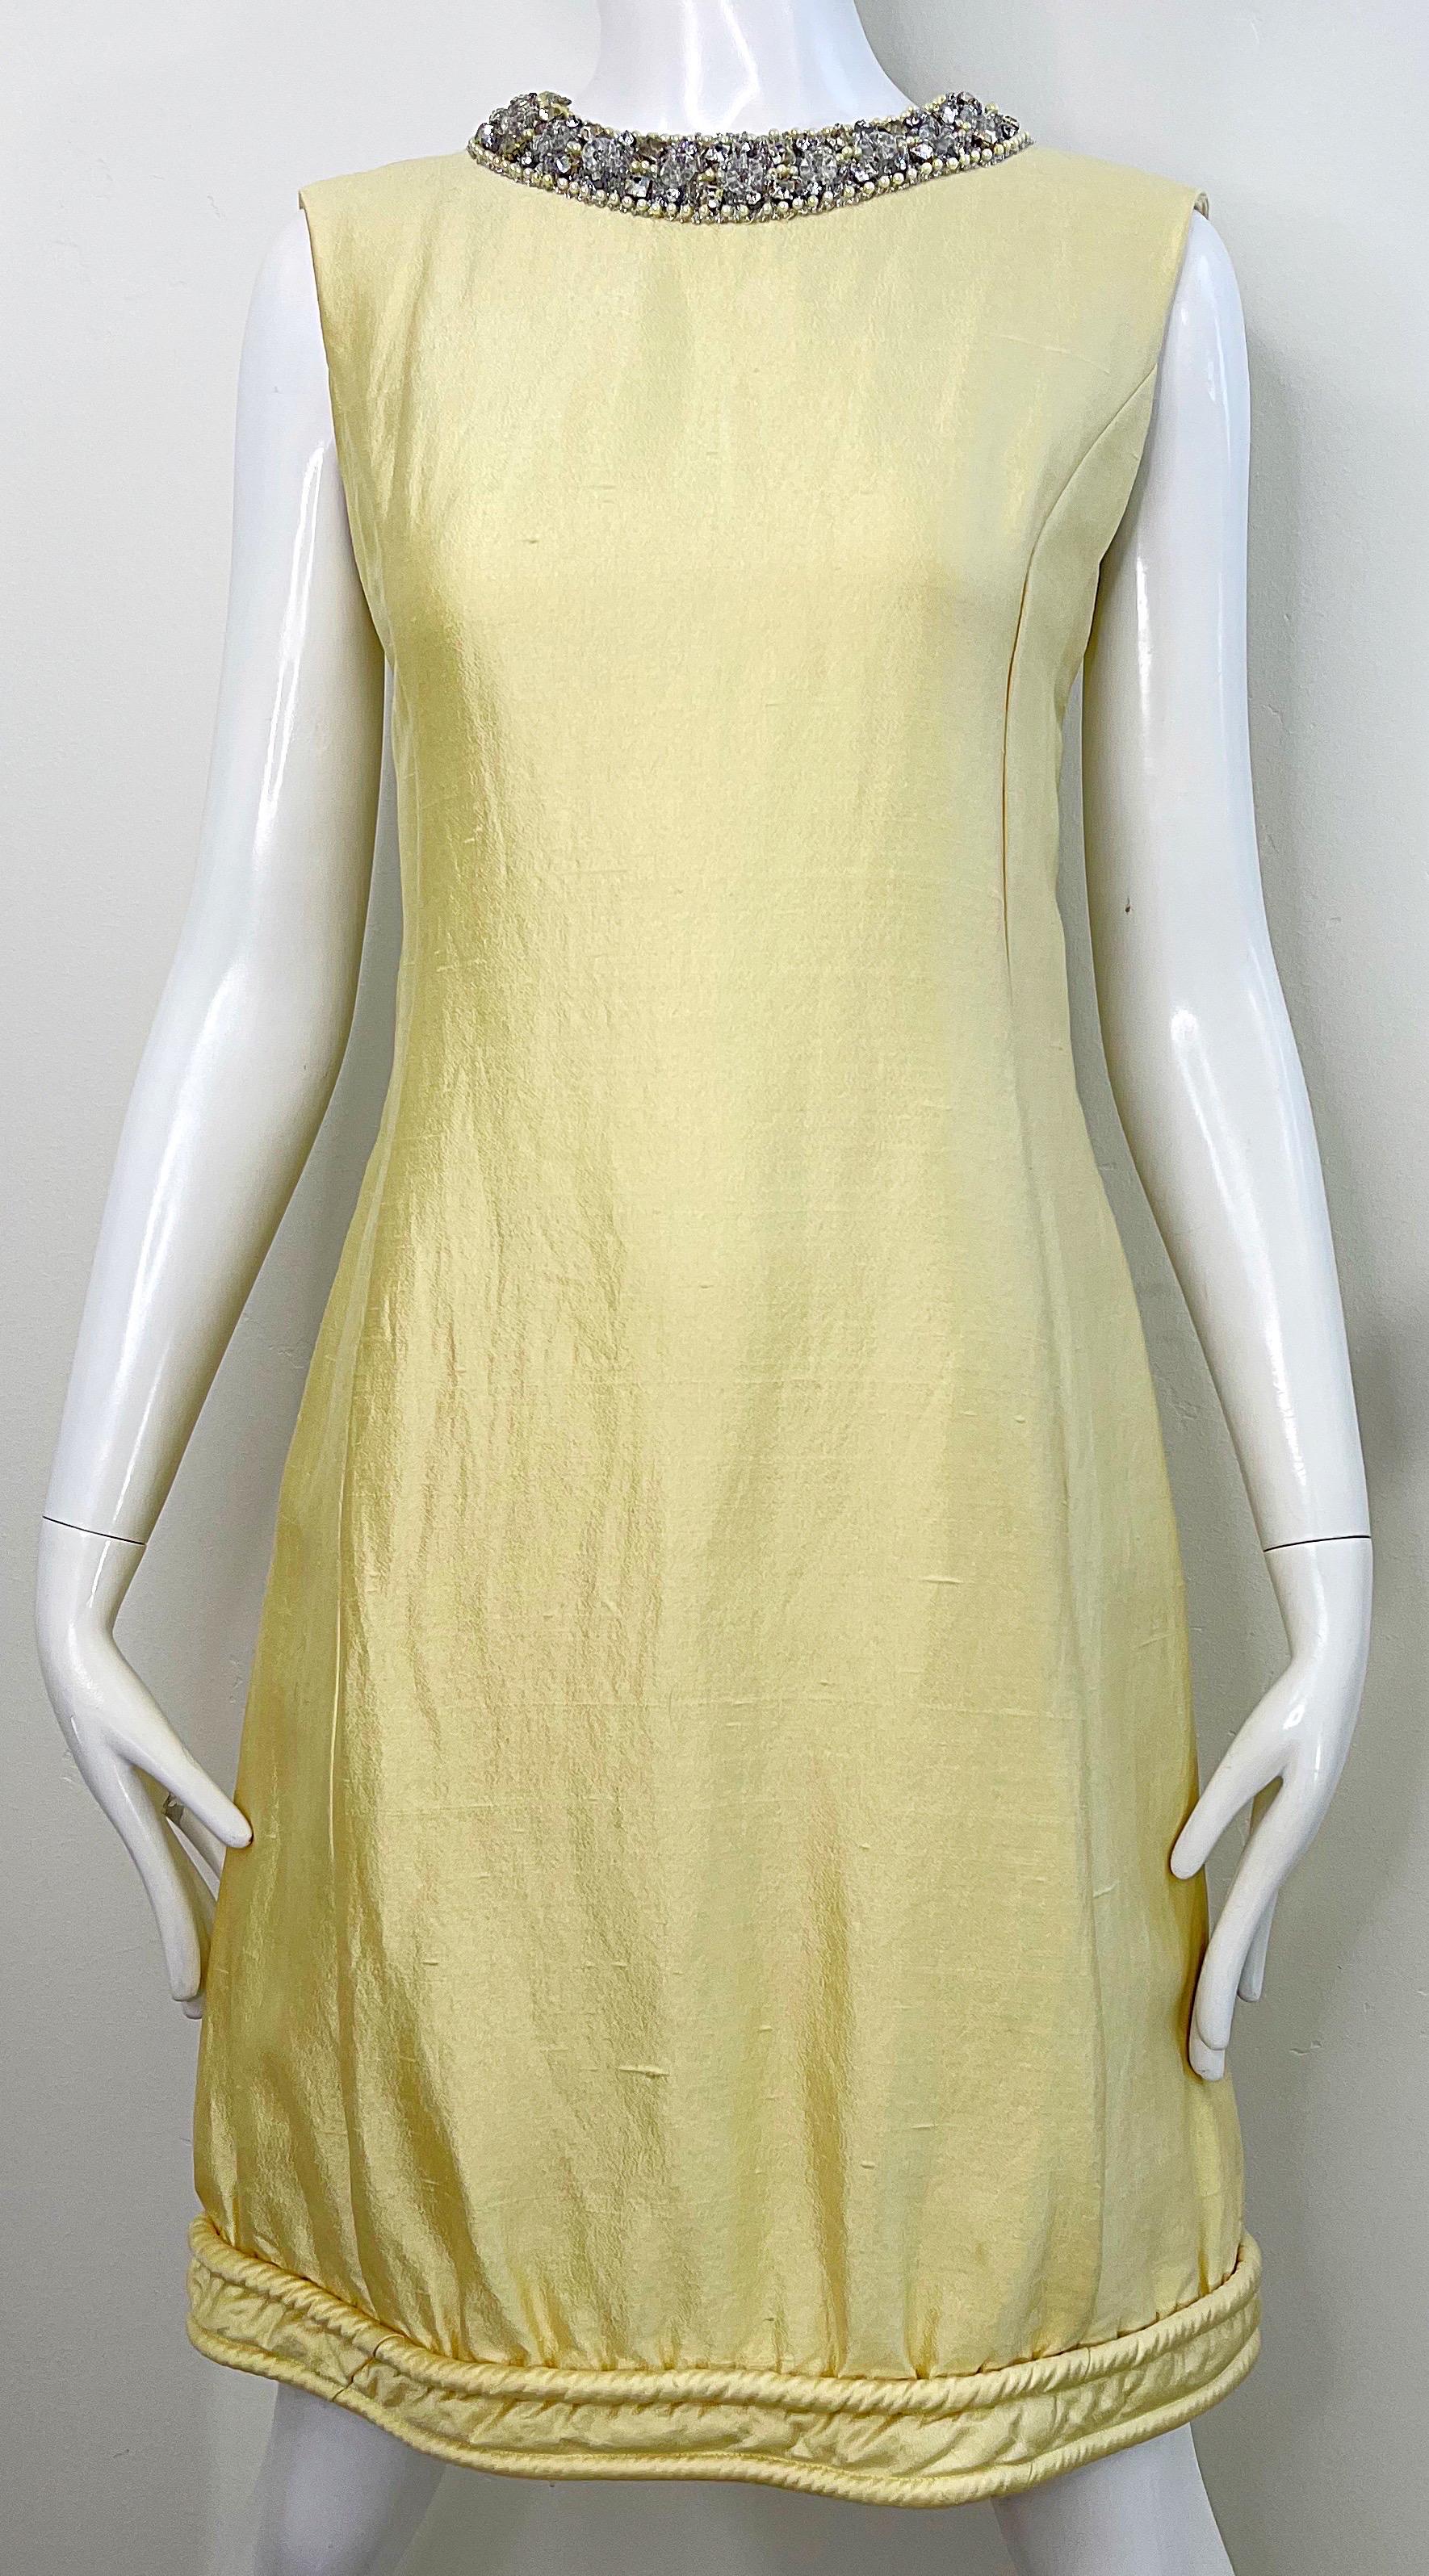 Chic 1960s Pale Yellow Silk Shantung Rhinestone Beaded Vintage 60s Shift Dress In Excellent Condition For Sale In San Diego, CA